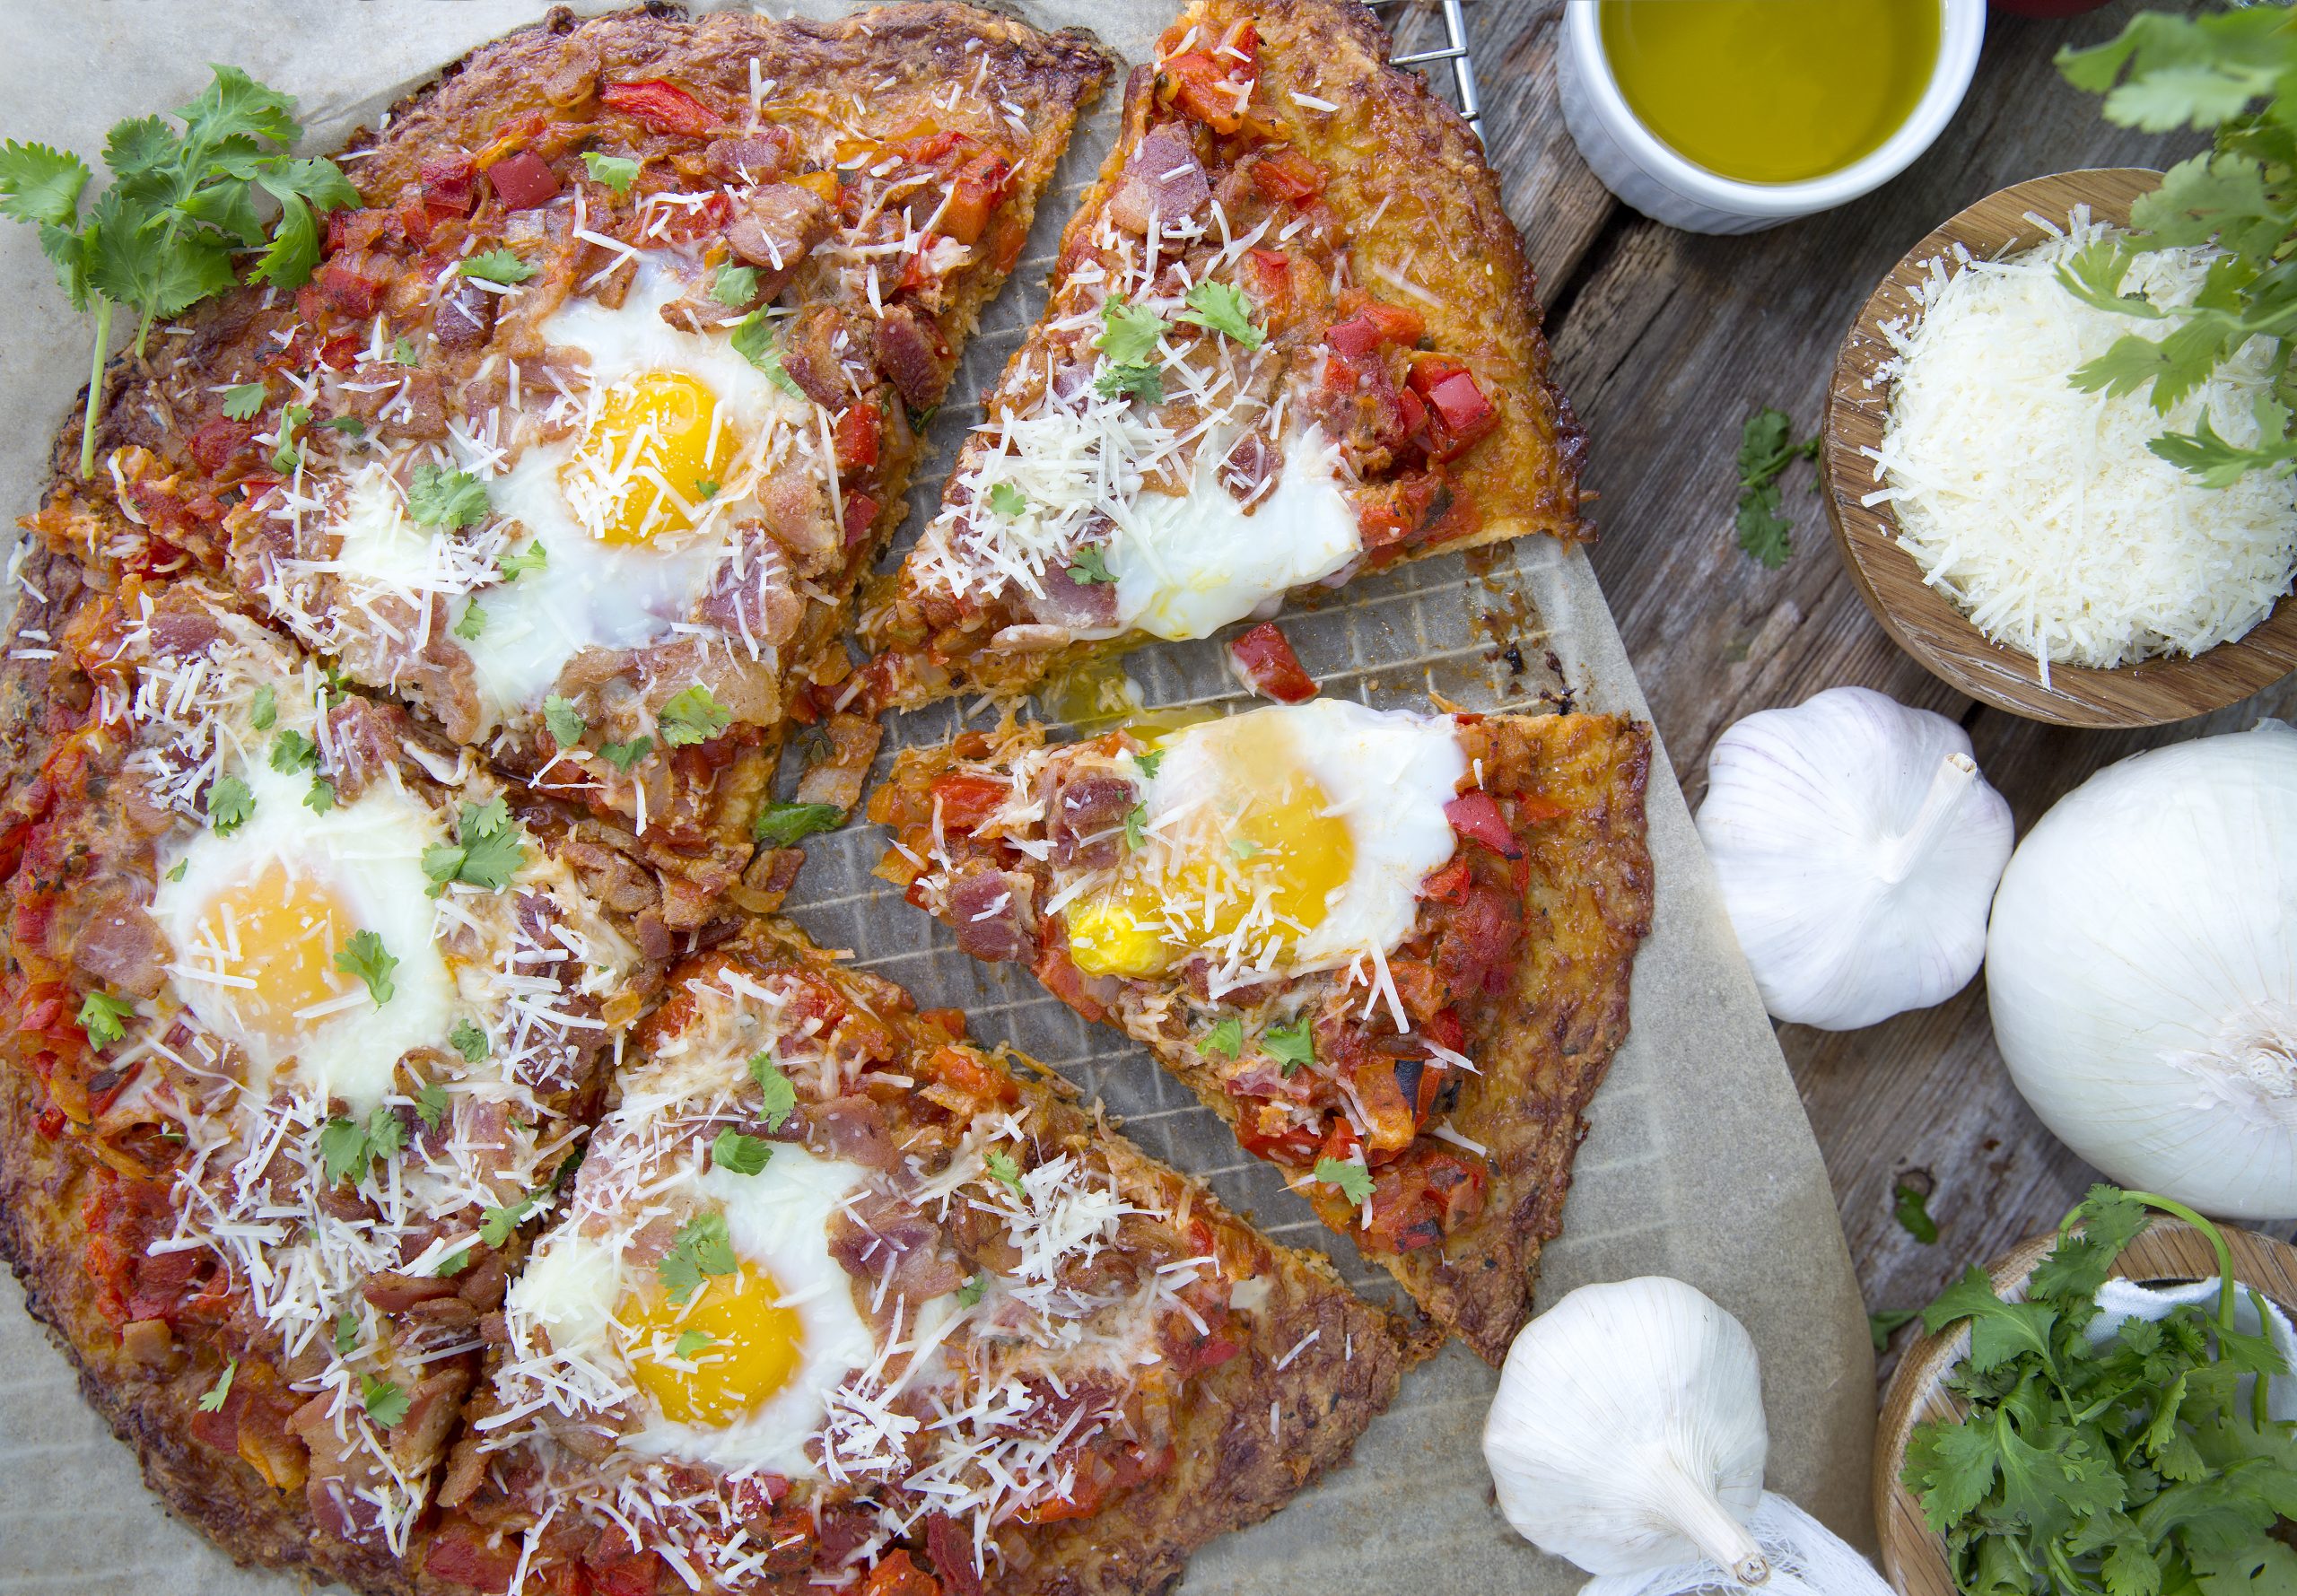 The Irresistible Egg and Bacon Keto Pizza